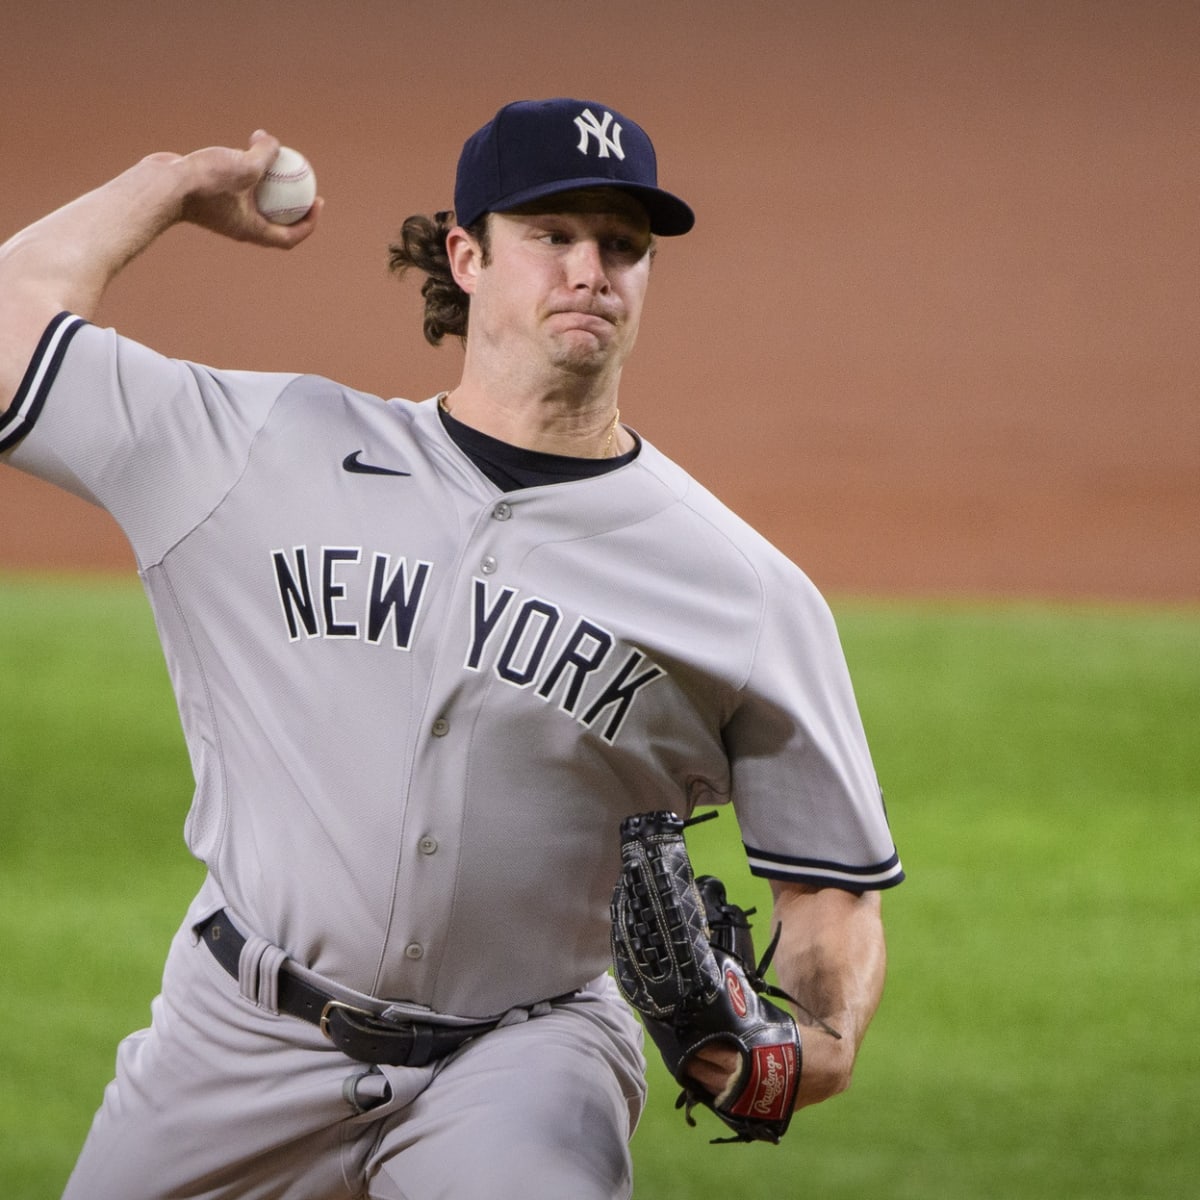 Gerrit Cole News, Biography, MLB Records, Stats & Facts